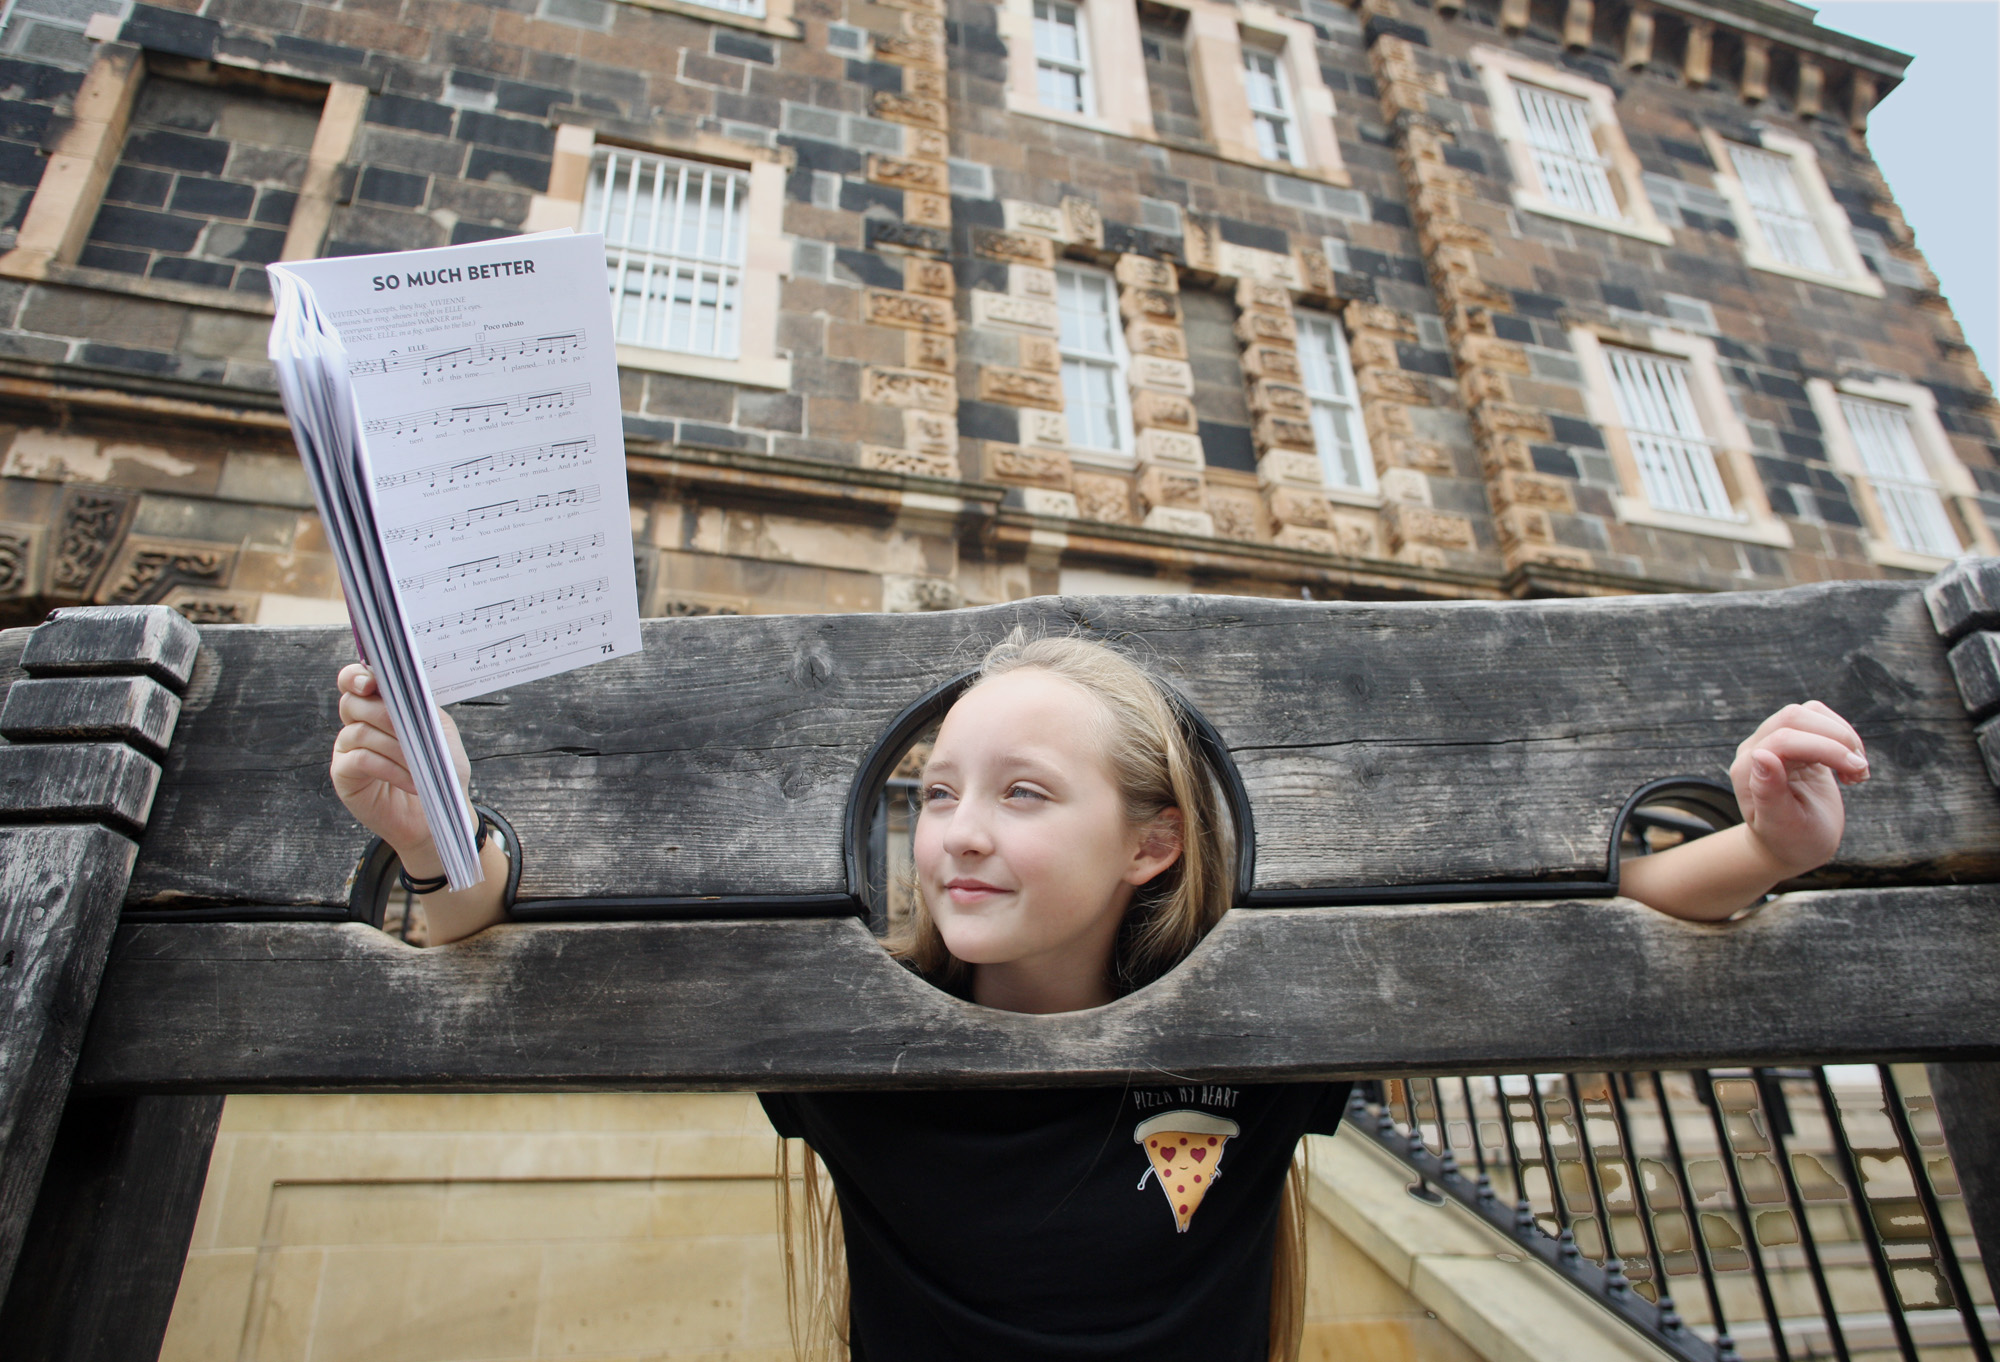 Morgain Preshaw at the Crumlin Road Gaol, where she\'ll be appearing in the musical Legally Blonde